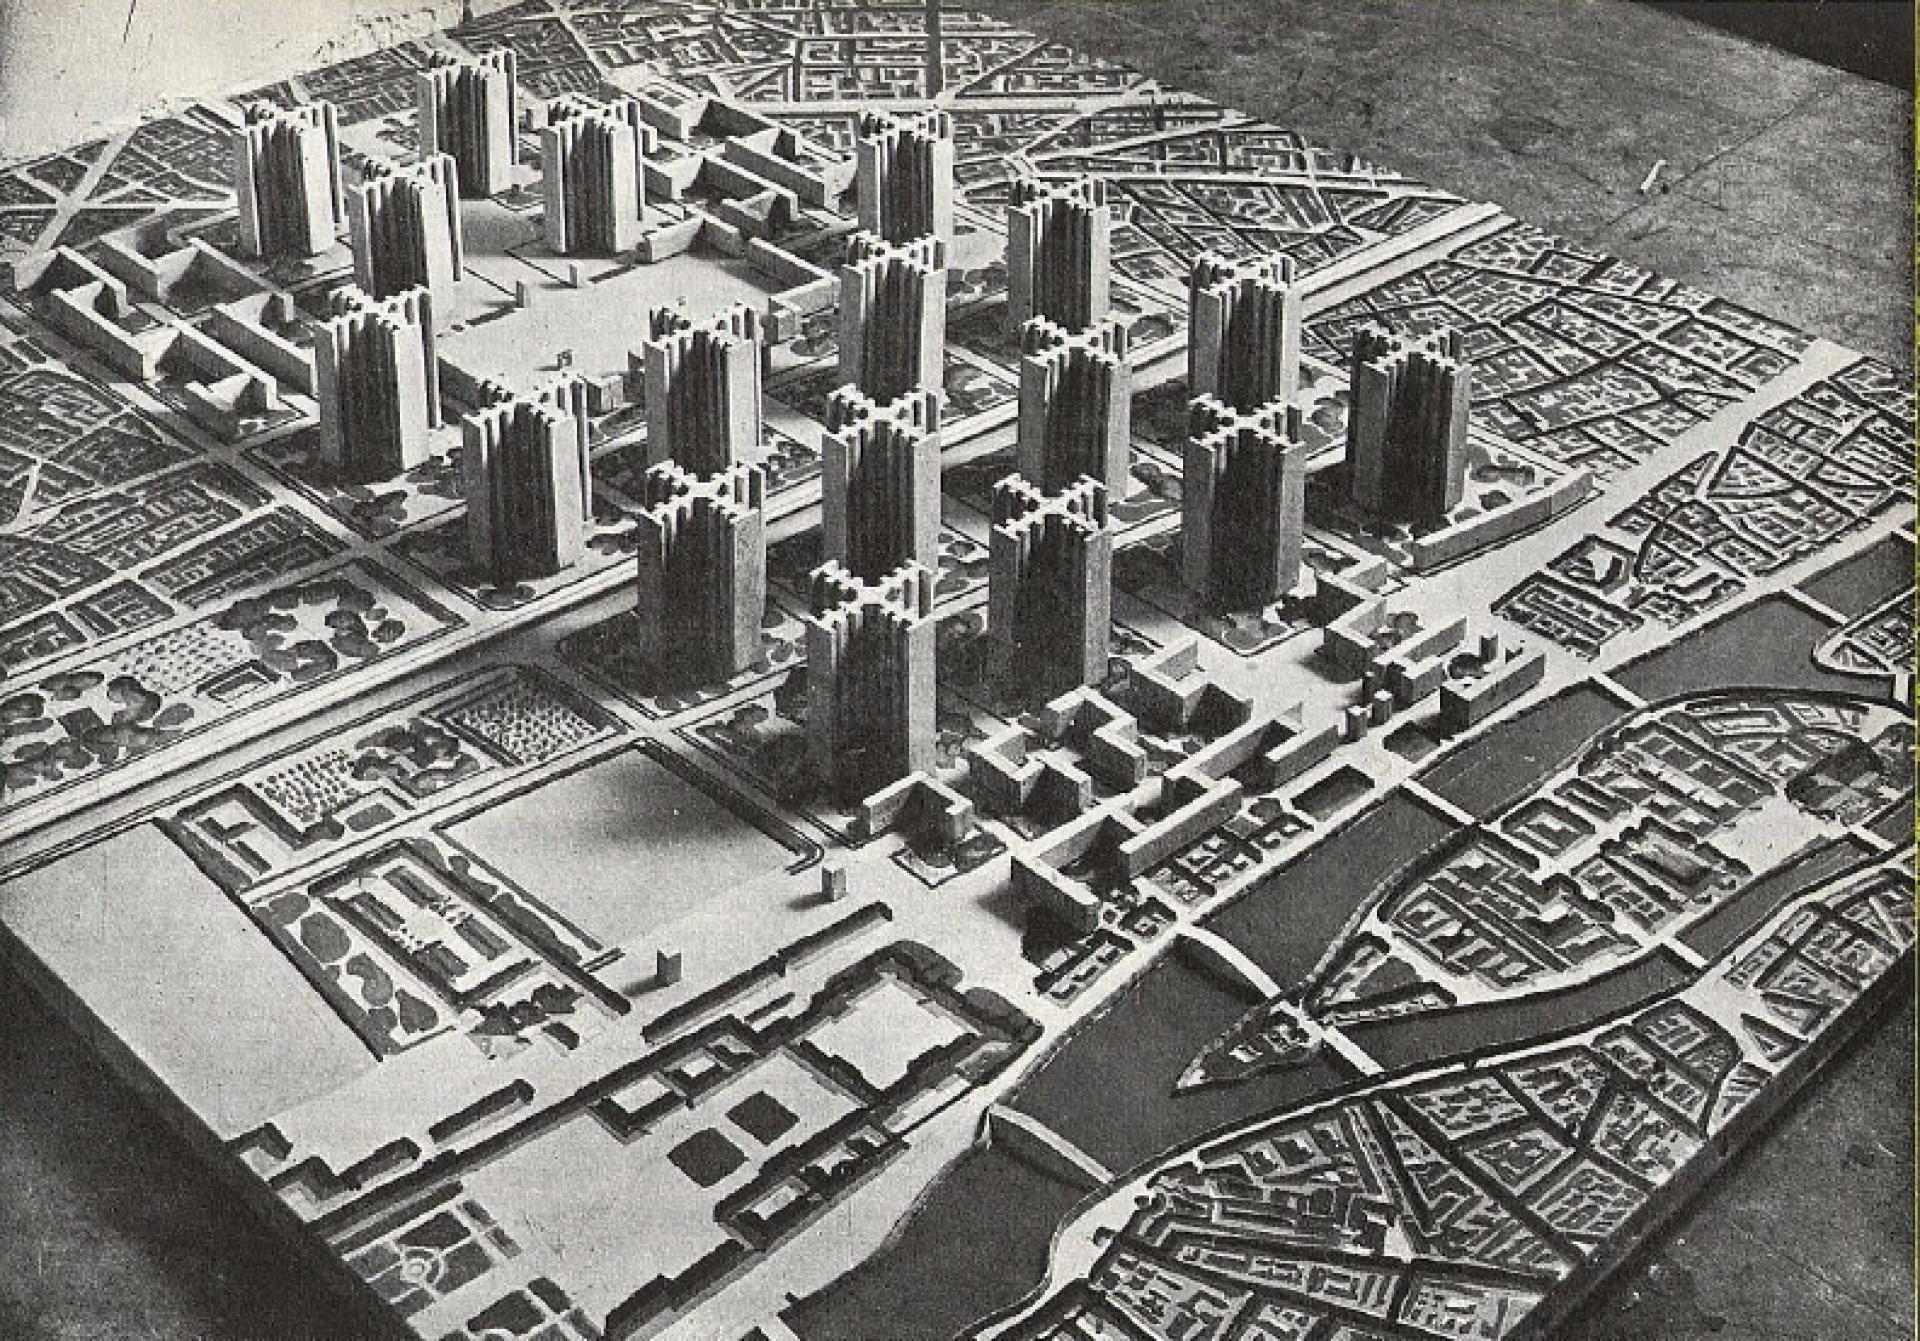 Le Corbusier’s proposed extent of the Radiant City. | Photo via Stadtstreicher